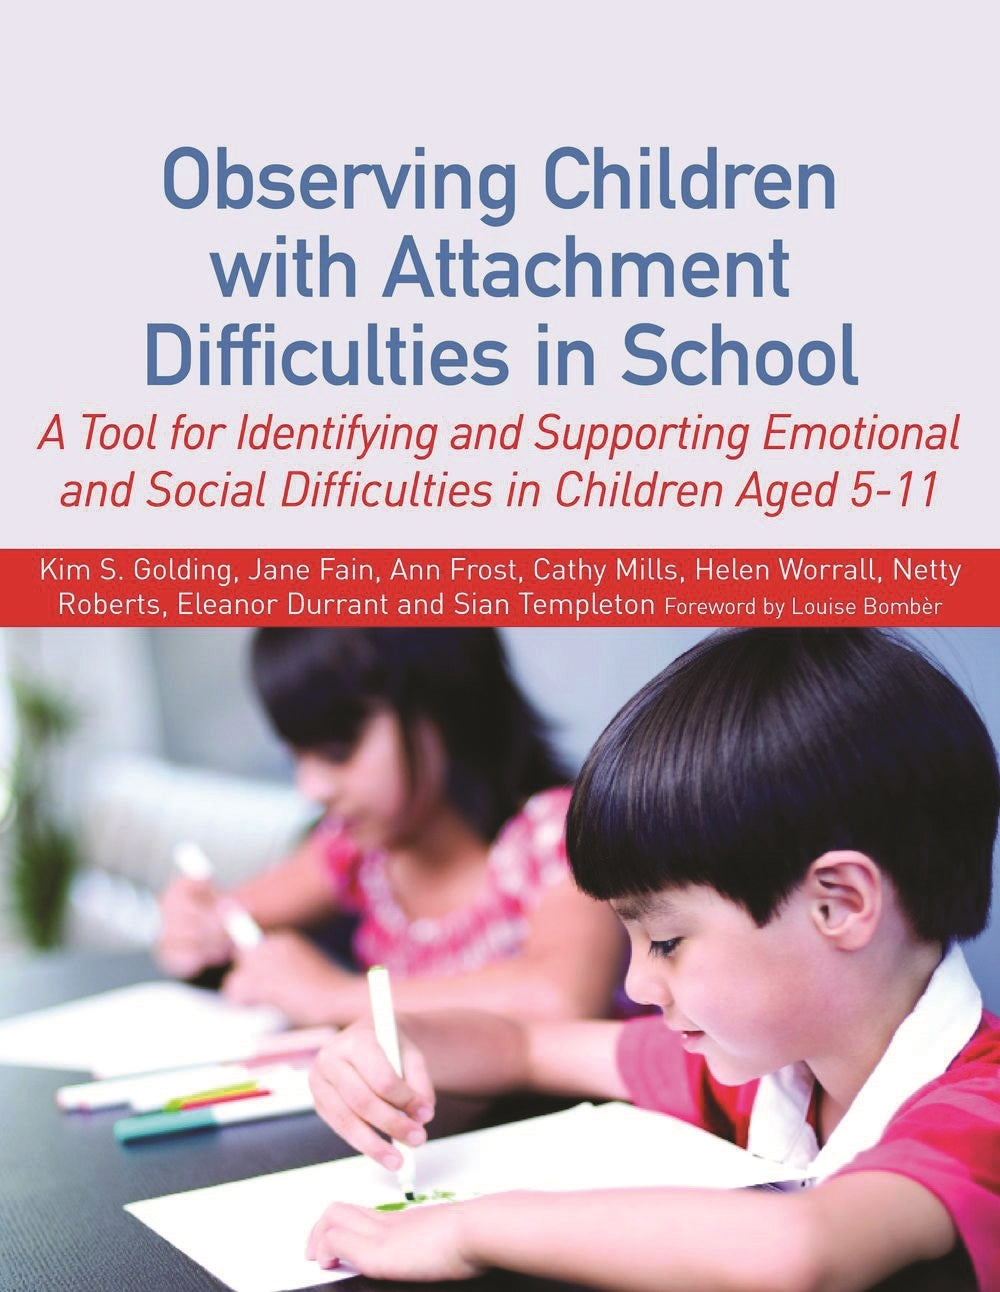 Observing Children with Attachment Difficulties in School by Kim S. Golding, Jane Fain, Sian Templeton, Eleanor Durrant, Ann Frost, Cathy Mills, Helen Worrall, Netty Roberts